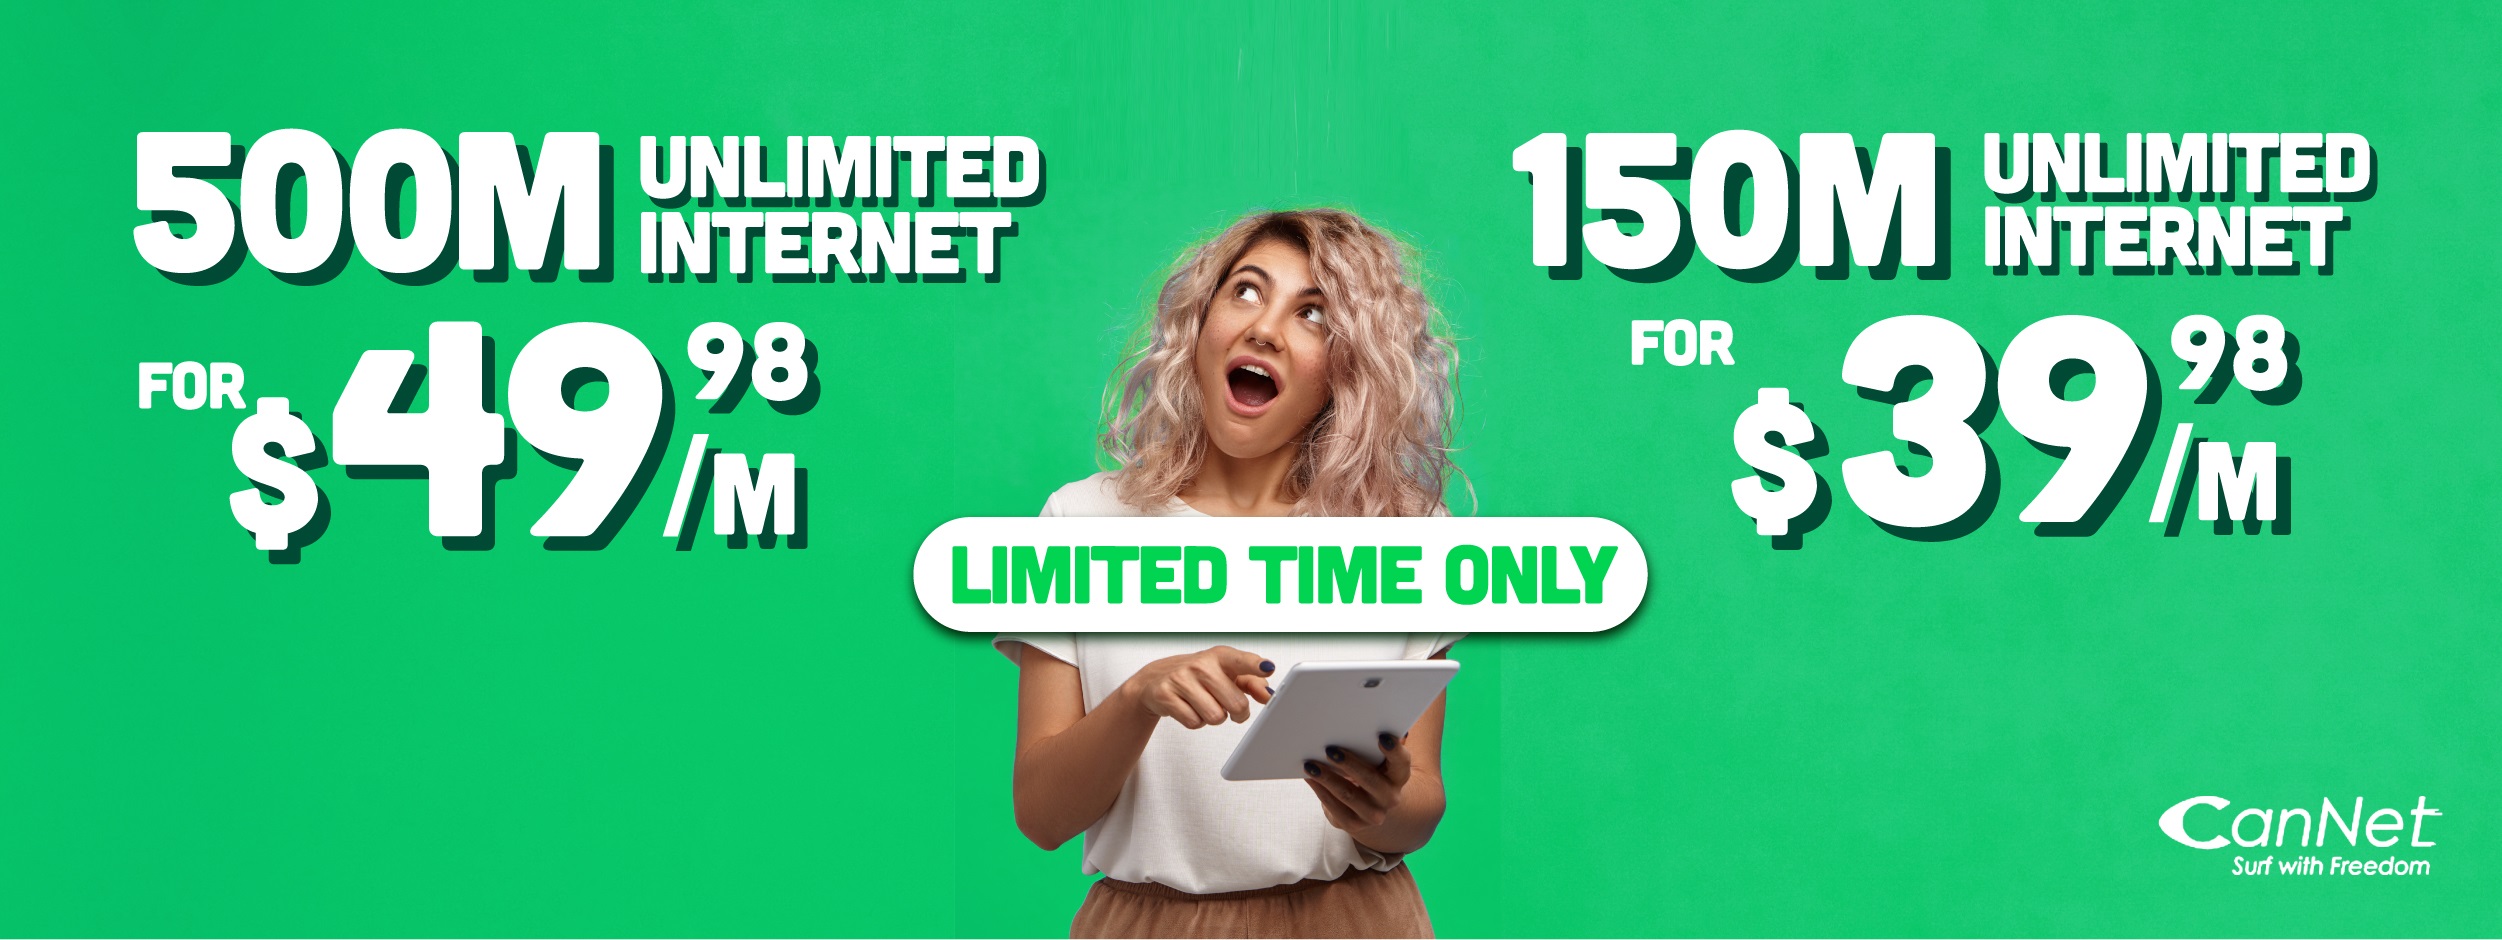 Sign Up For High-Speed Internet 75M for $29.98/m, 150M for $39.98/m, And 500M for $49.98/m